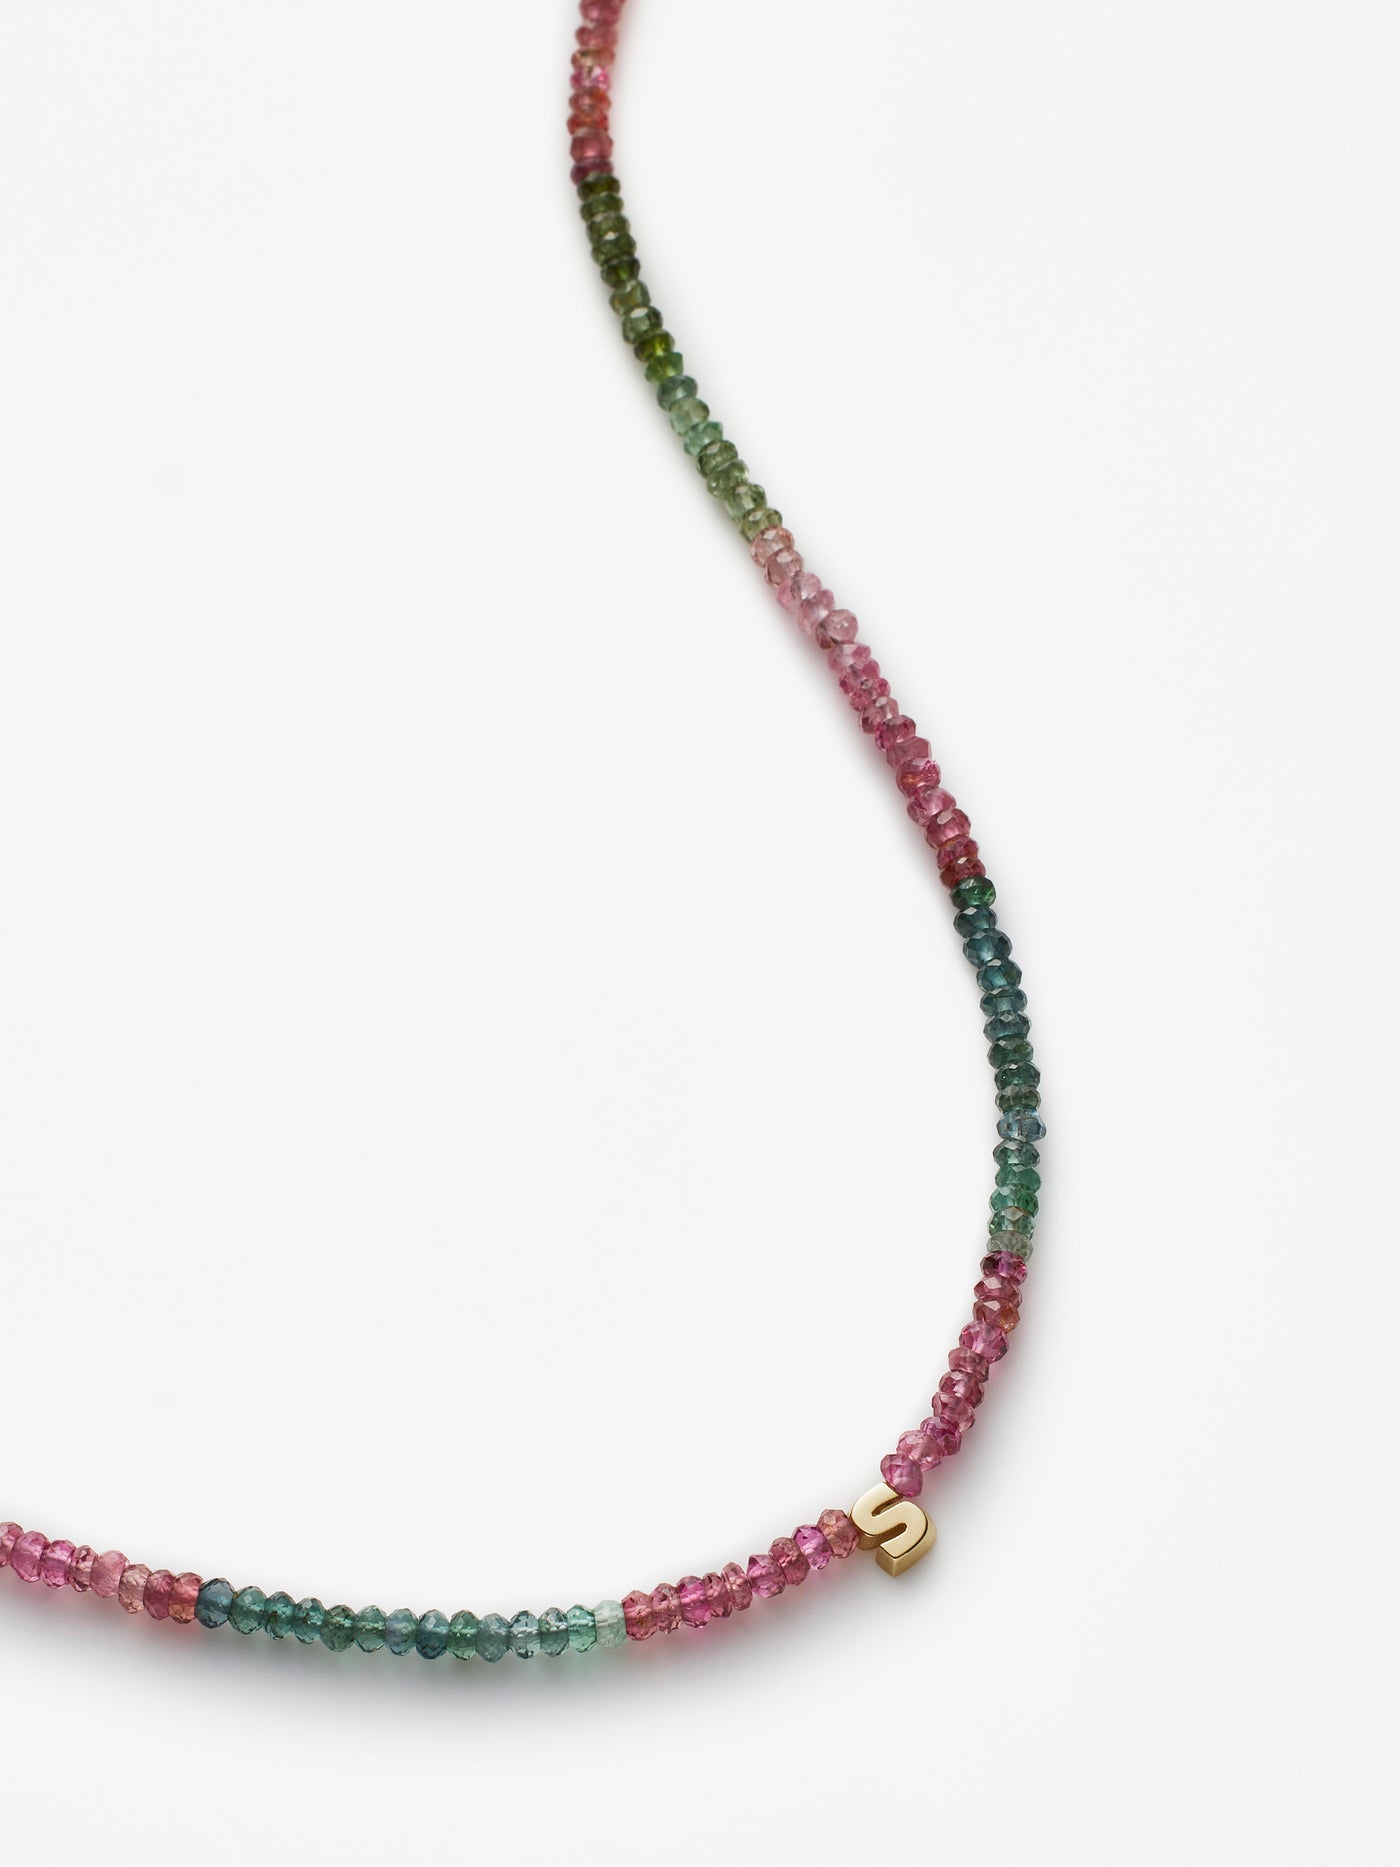 Hand-strung necklace with natural, faceted tourmaline gemstones and miniature three-dimensional letter in 18k solid gold